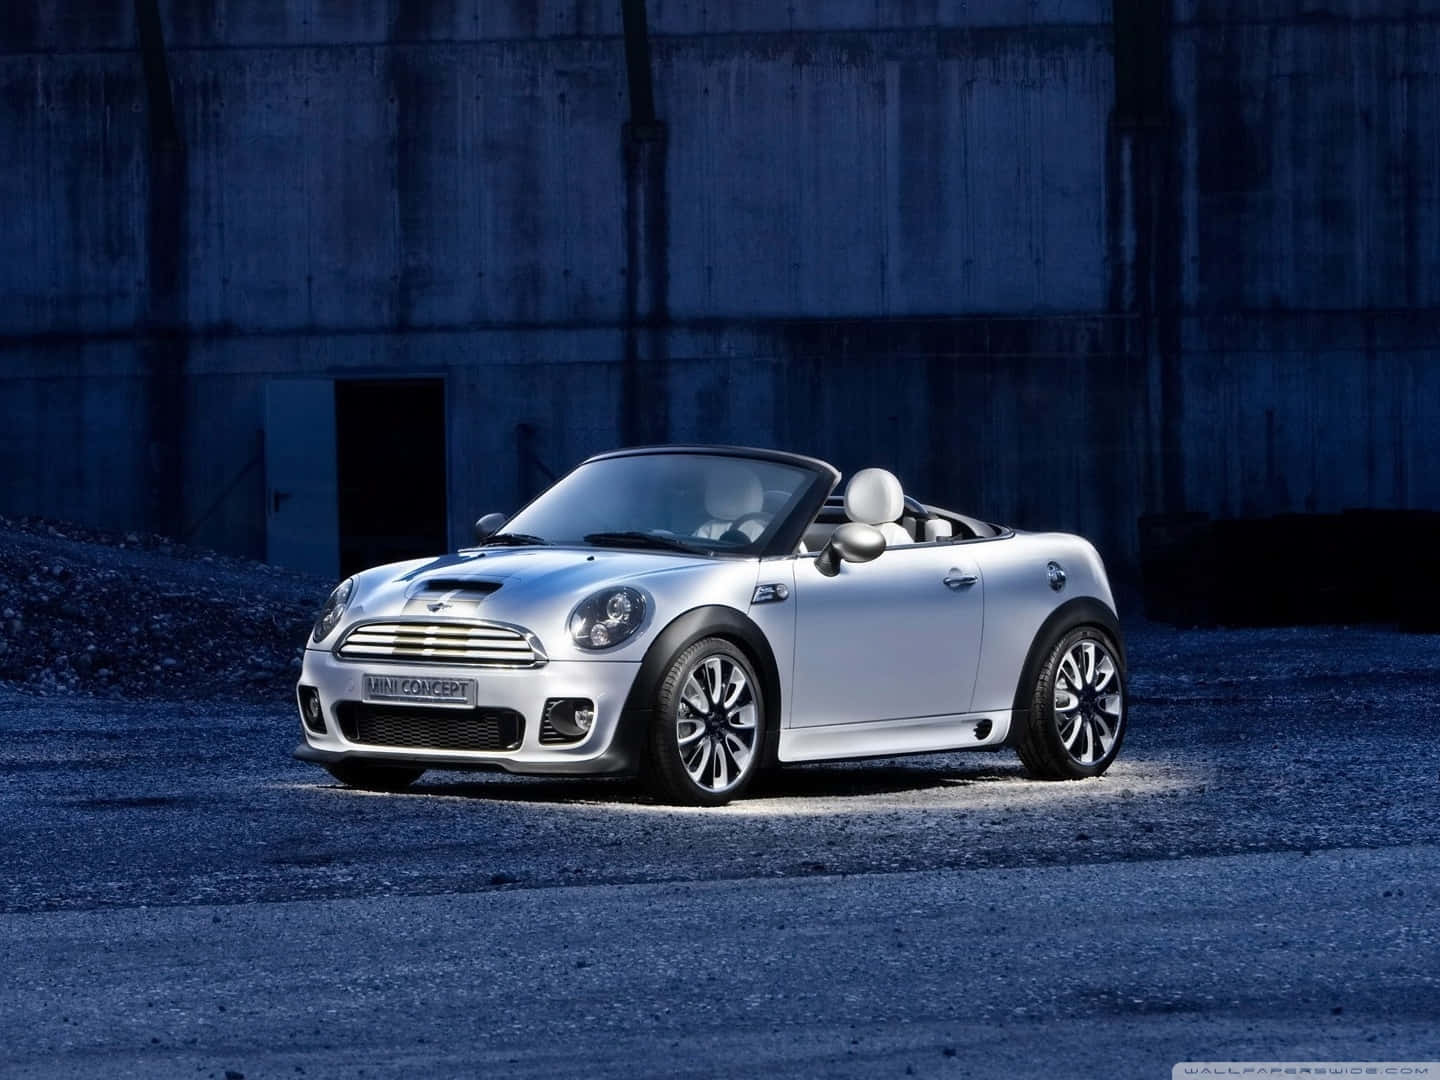 Captivating Mini Roadster In Action Wallpaper